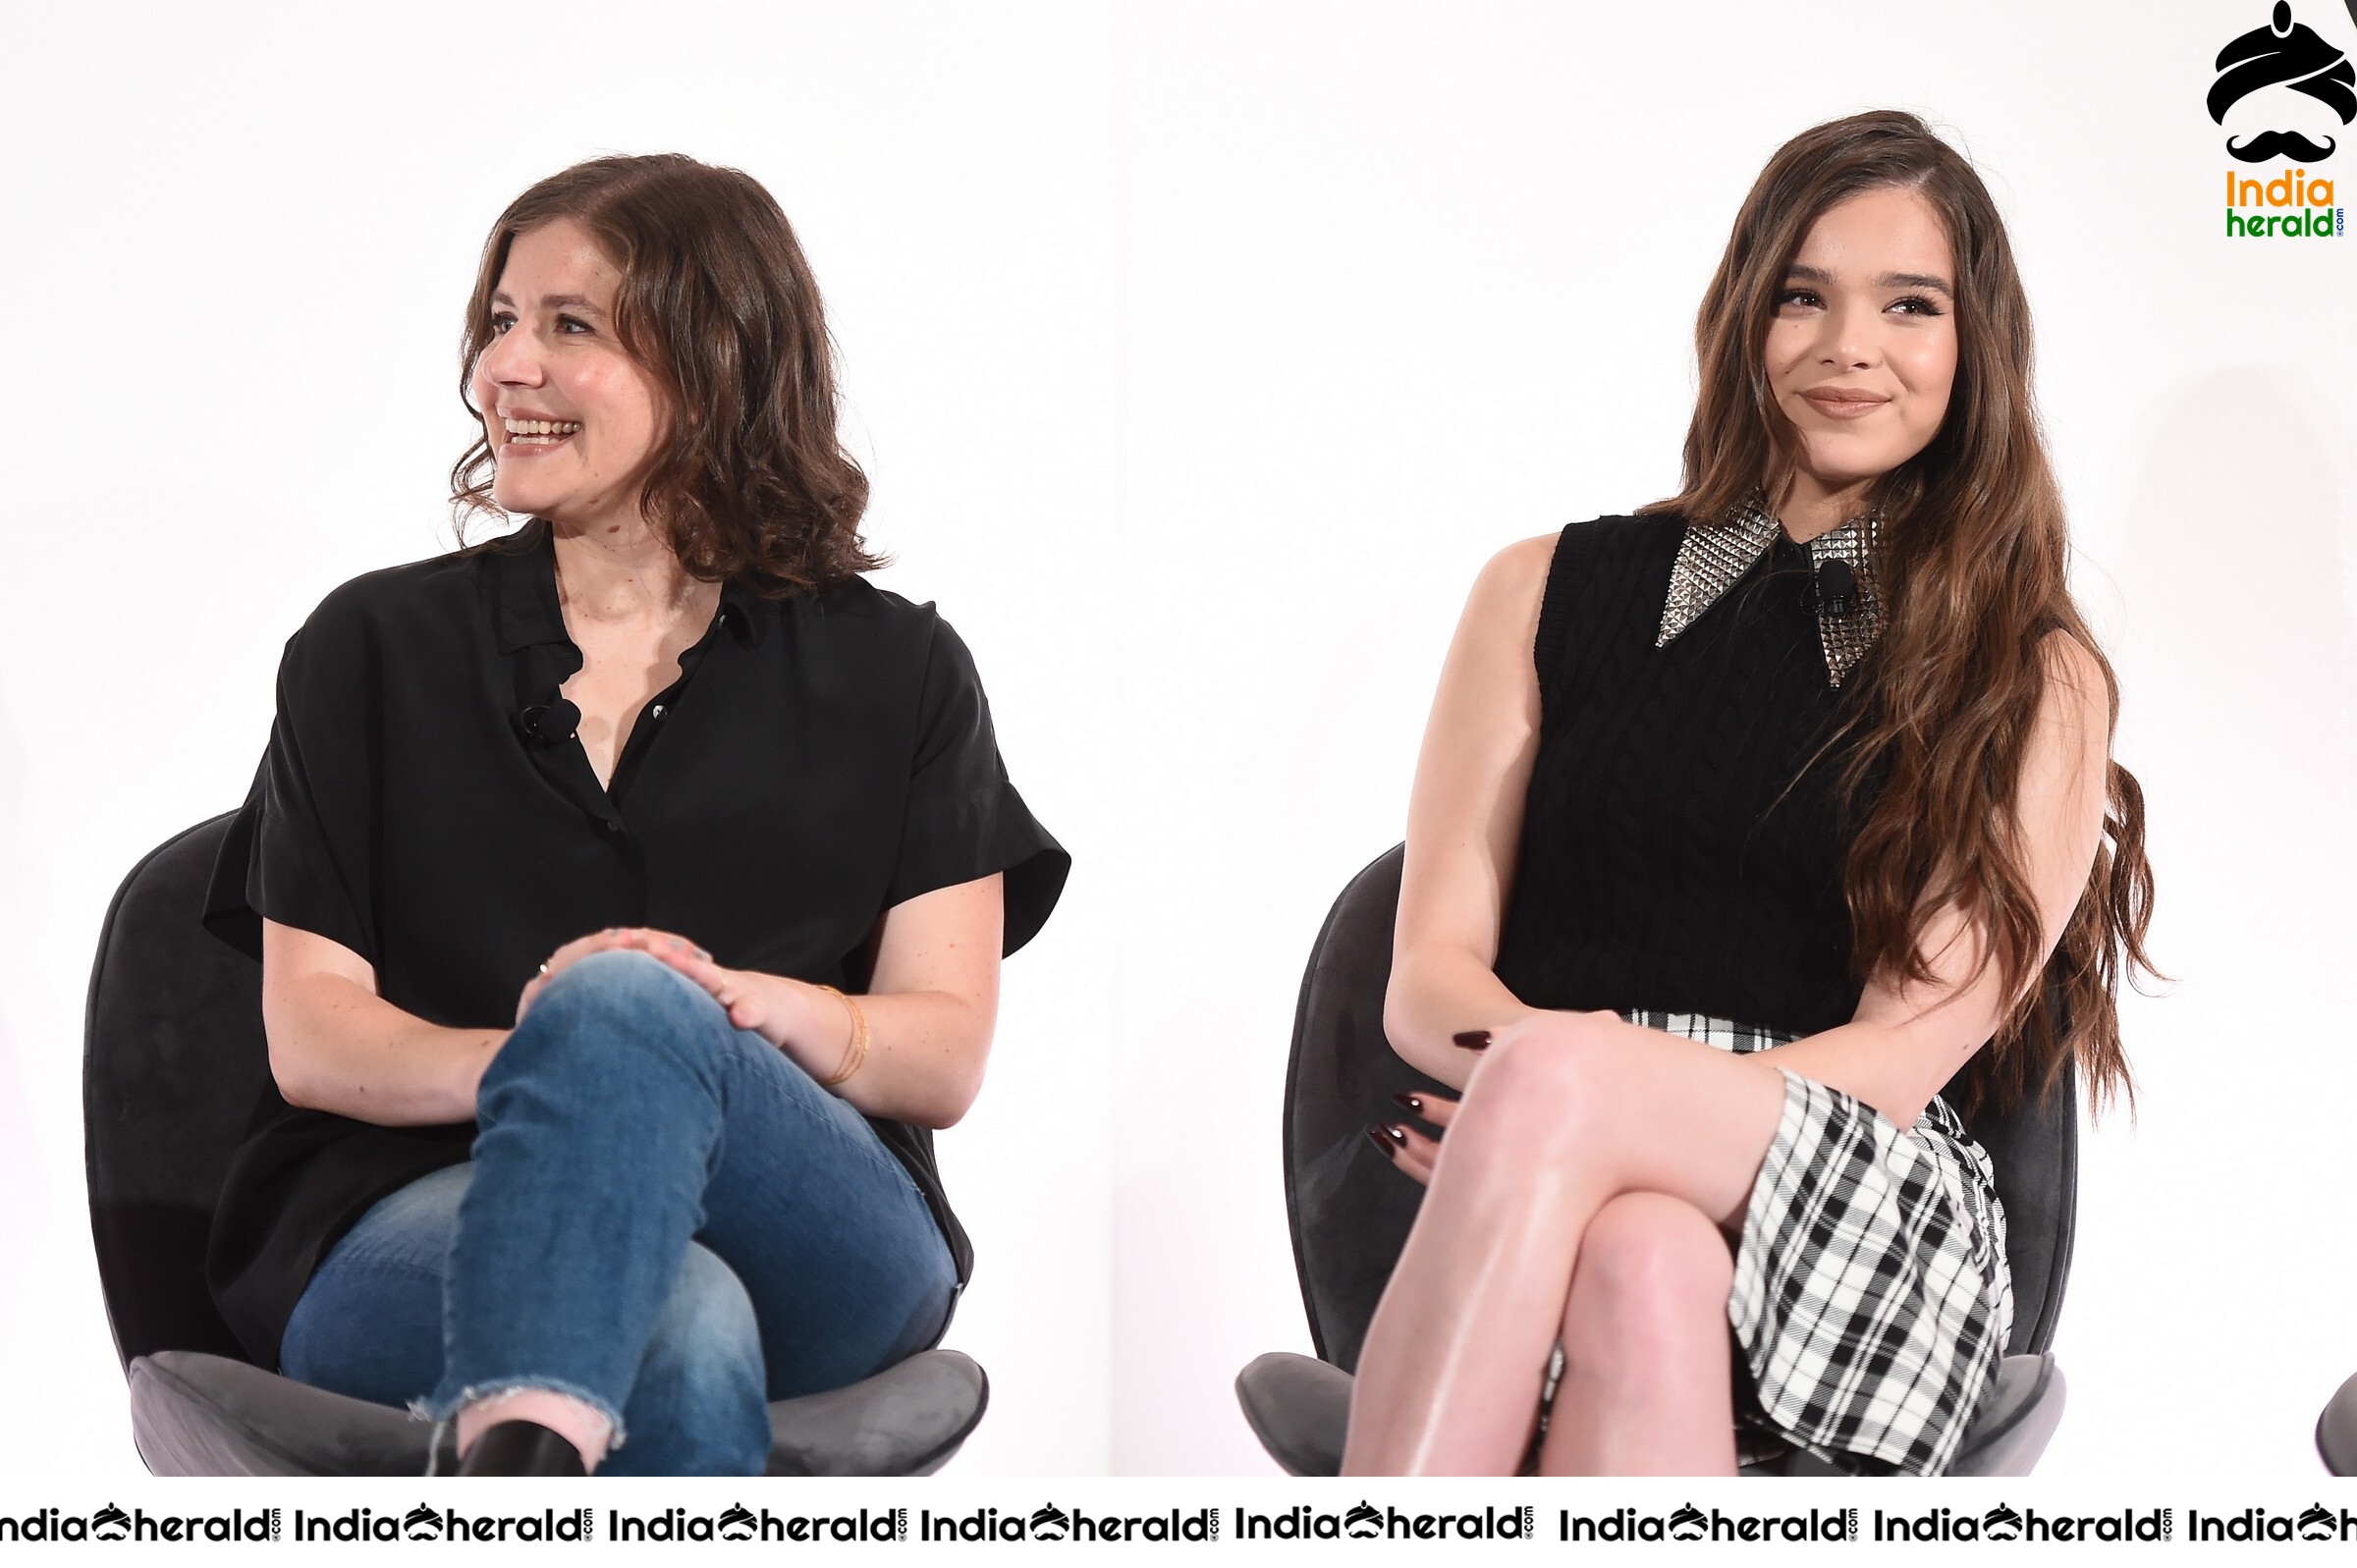 Hailee Steinfeld at Variety x Apple TV Collaborations in Los Angeles Set 2